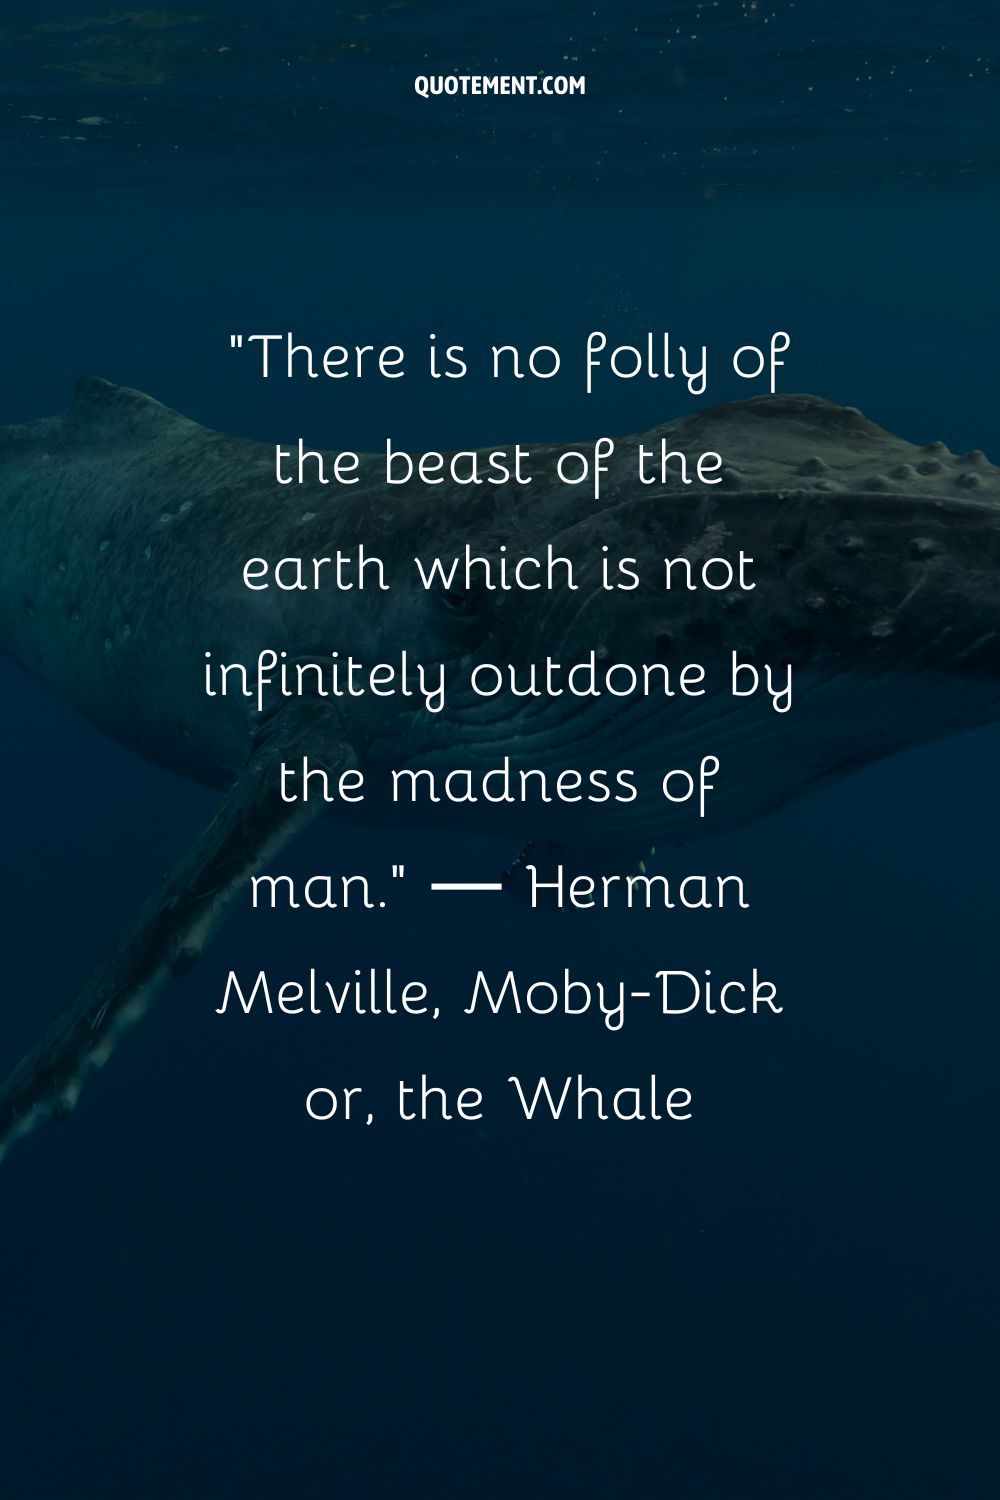 There is no folly of the beast of the earth which is not infinitely outdone by the madness of a man